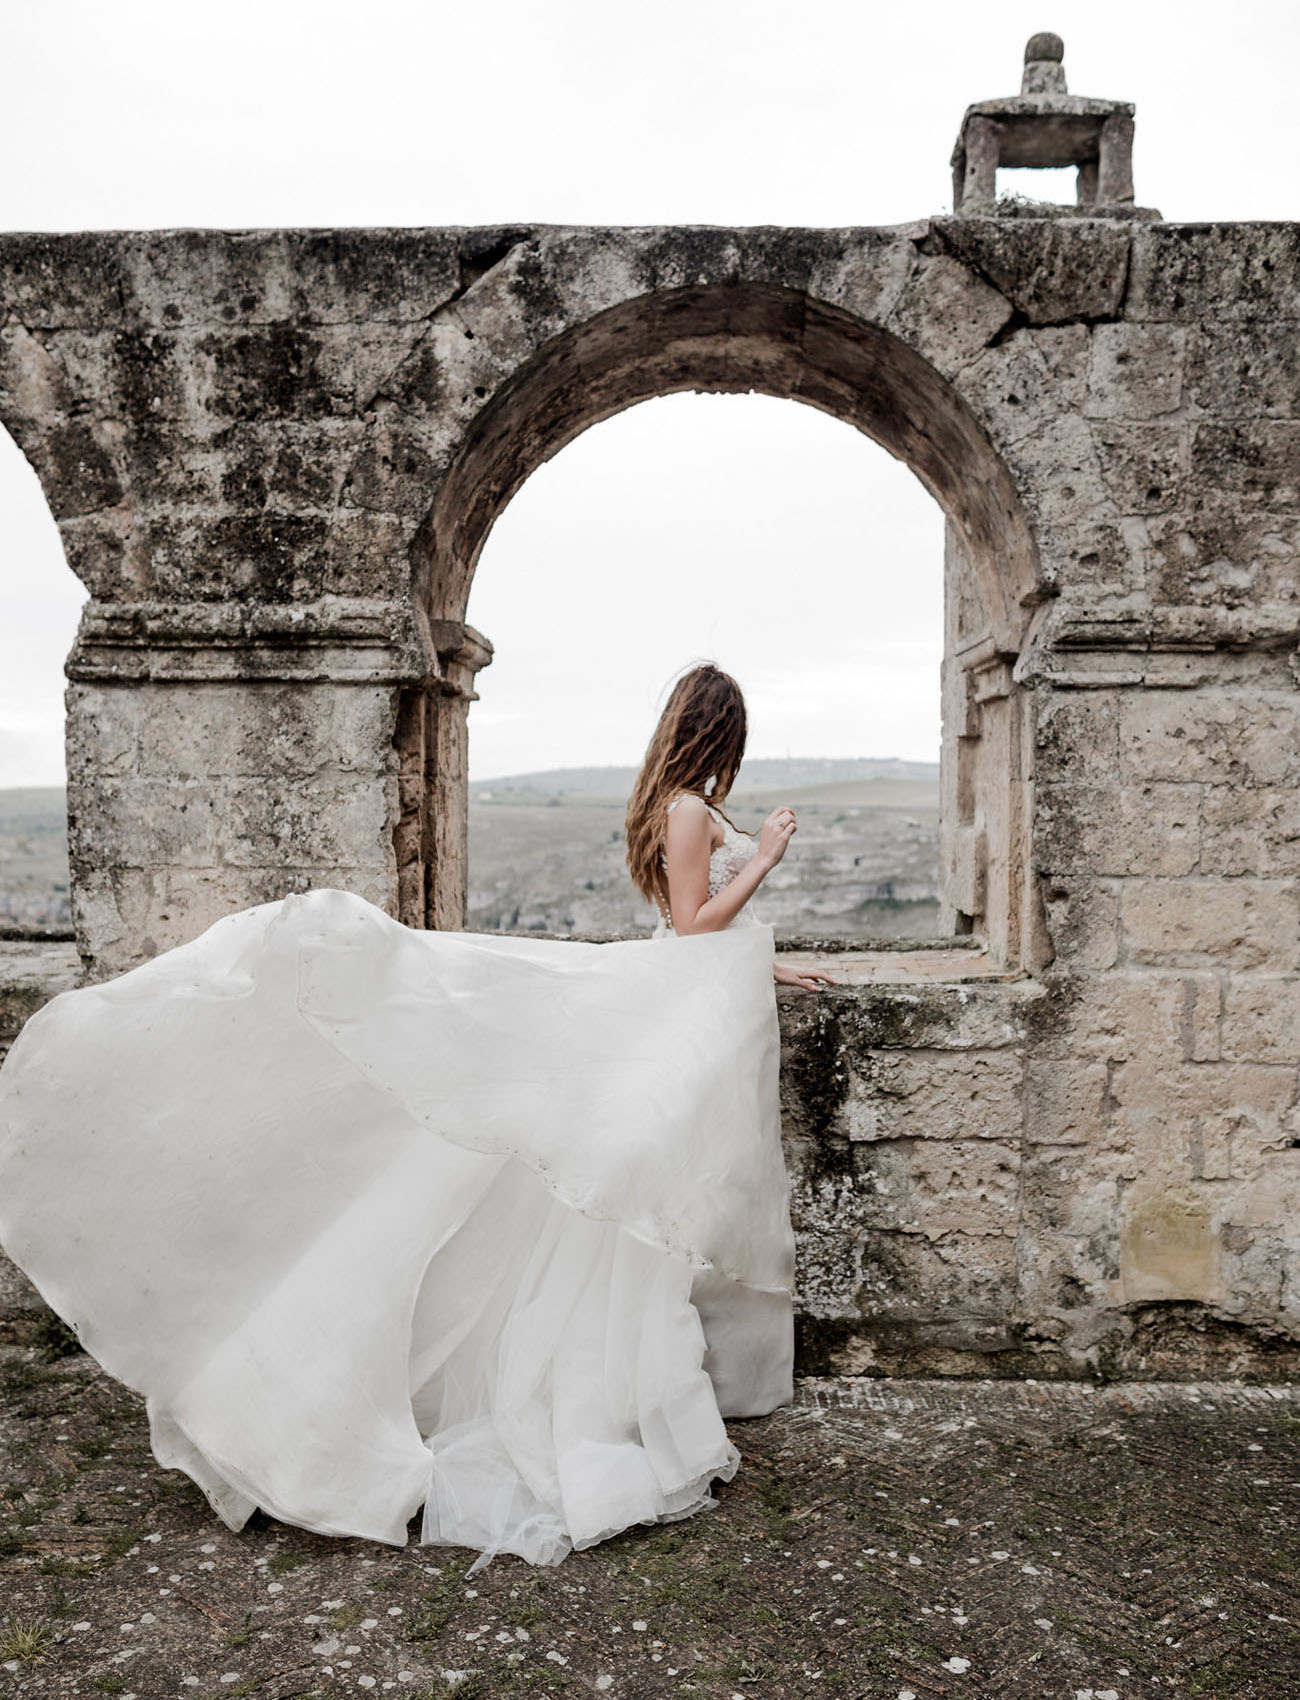 This wedding shoot took place in Matera, which is an Italian gem not known to everyone but beautiful